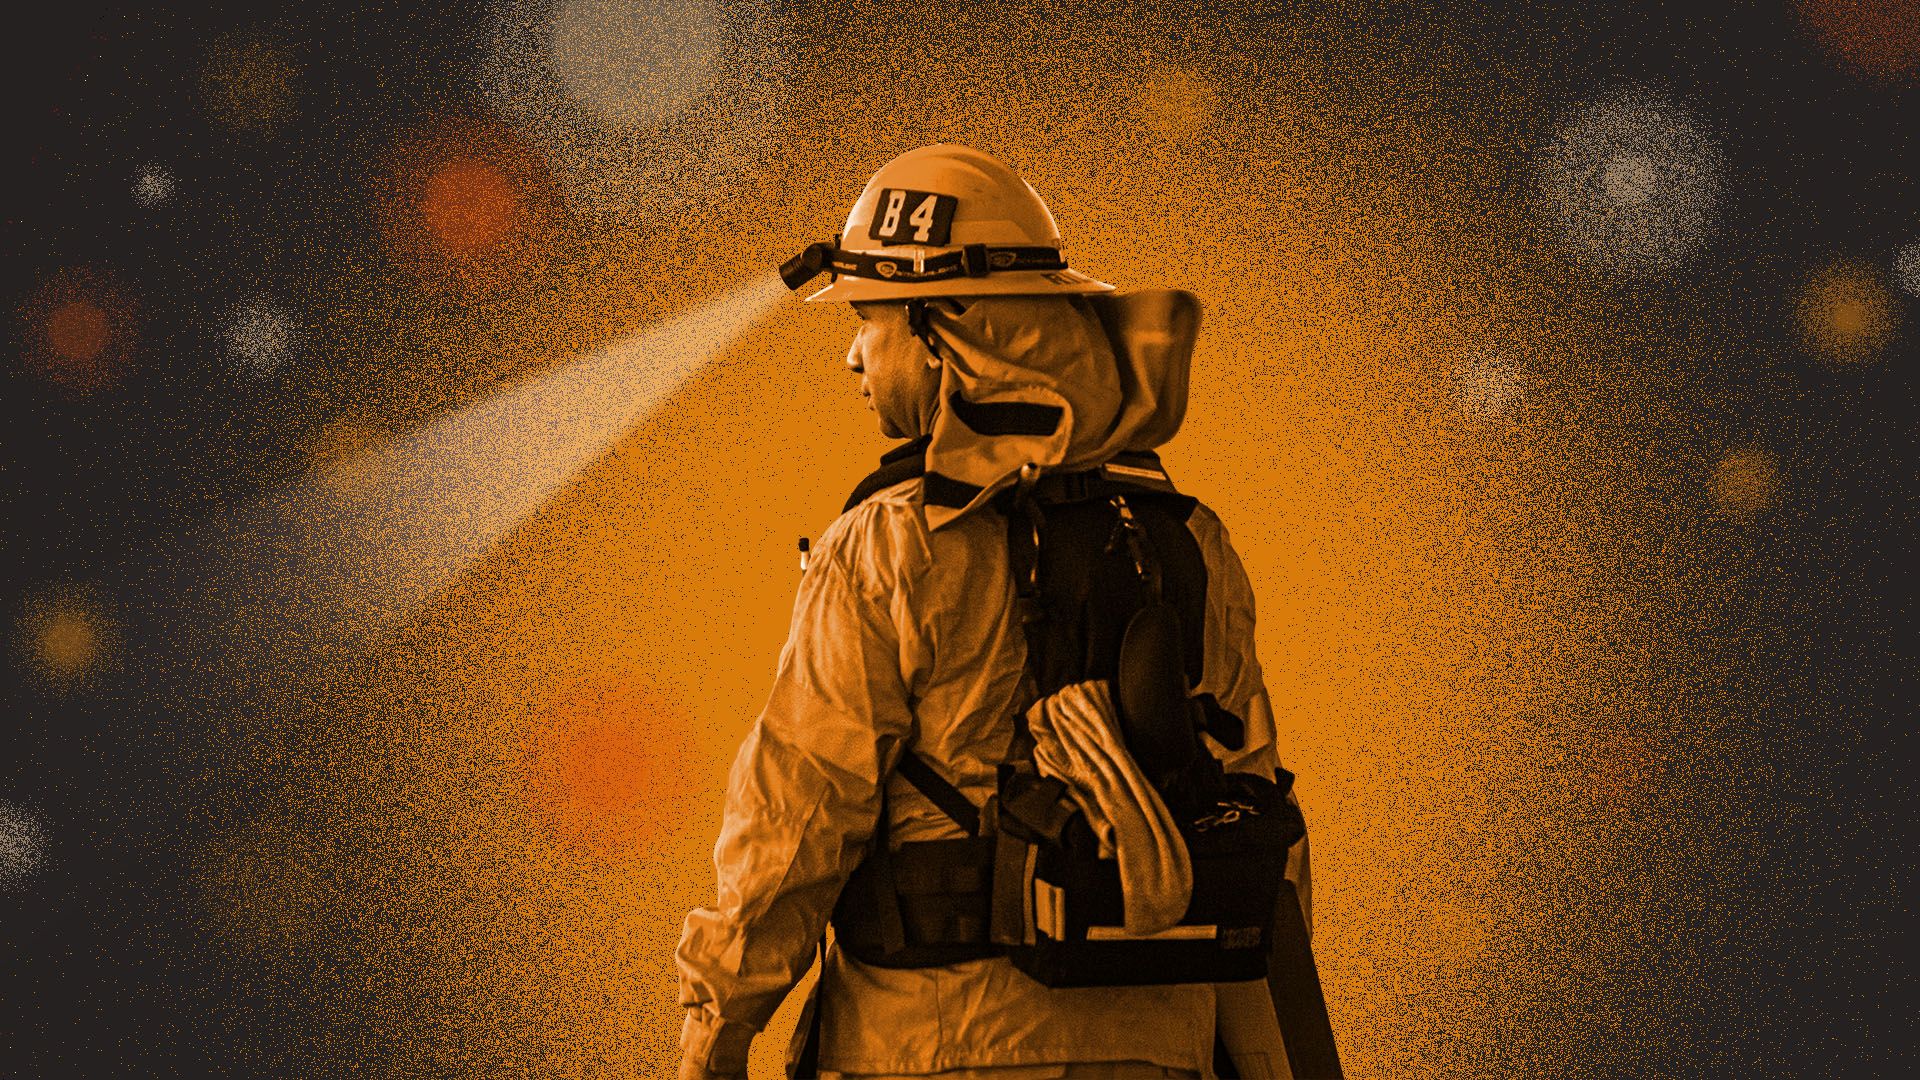 Illustration of a firefighter with his back to the viewer surrounded by lights and embers